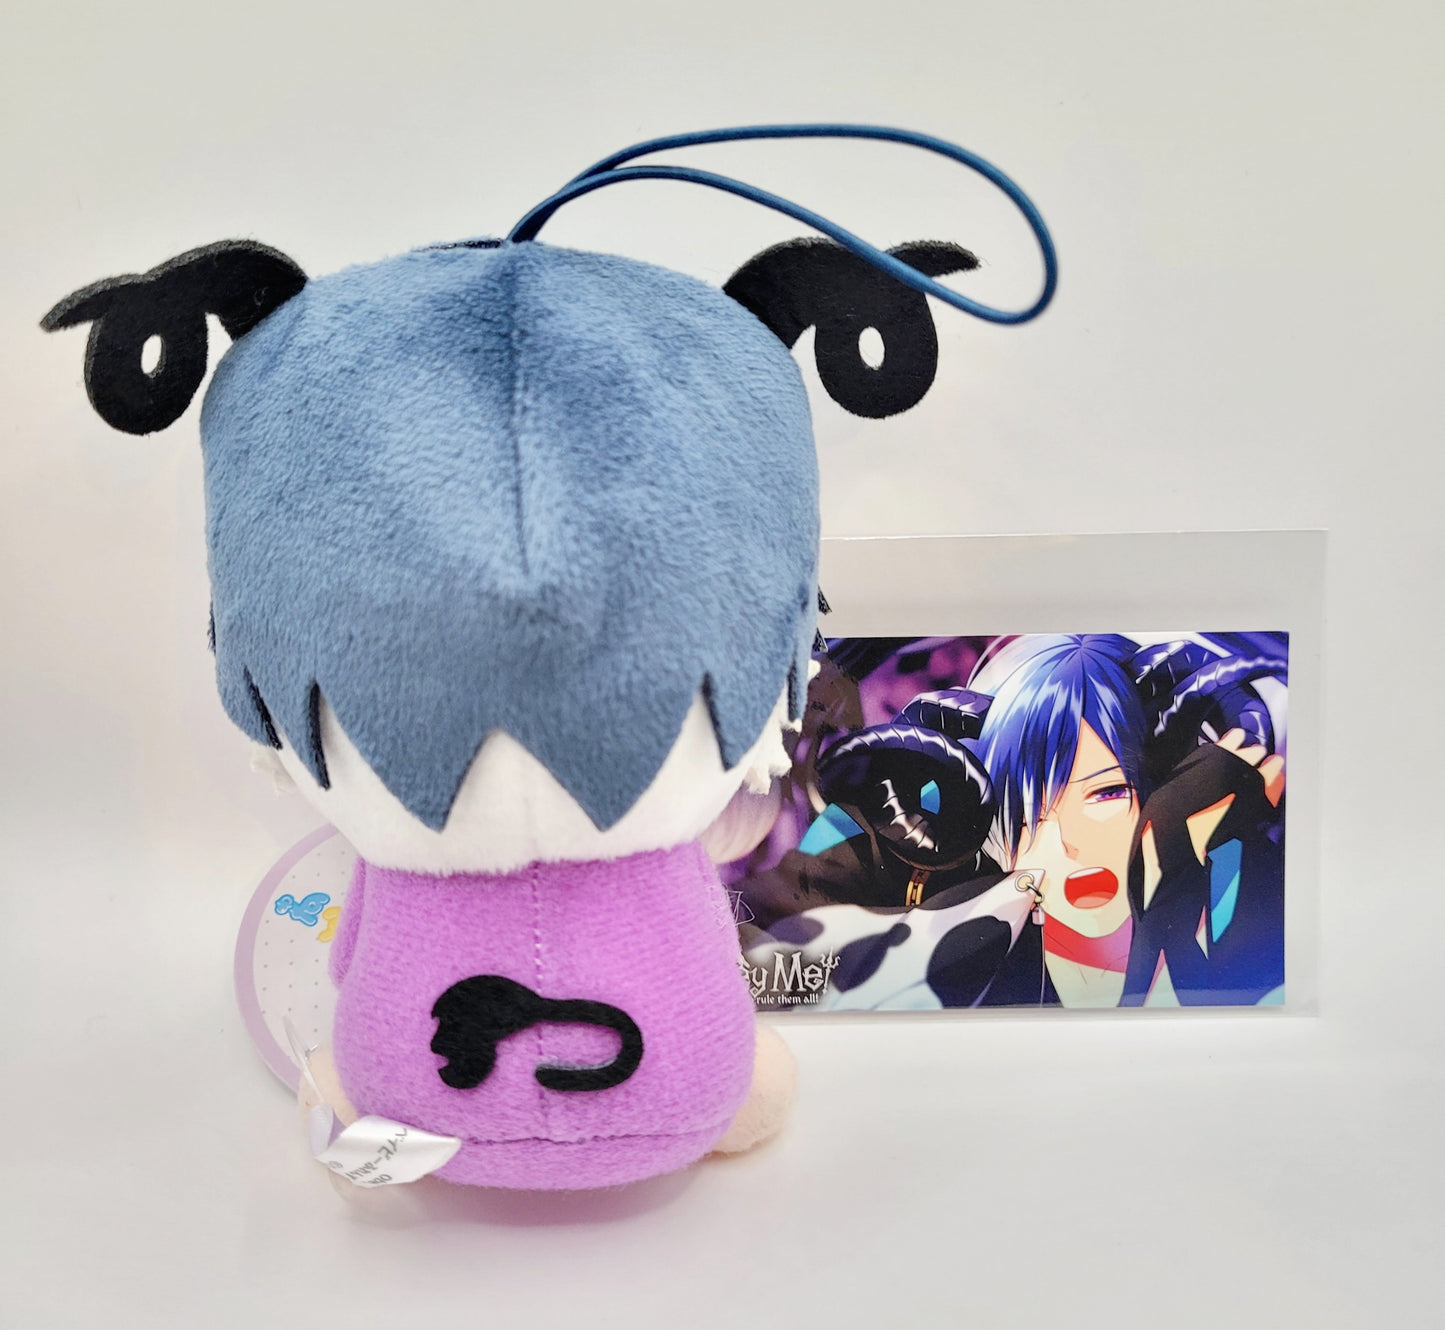 Obey Me! Baby Belphegor Mini Plush & Character Card